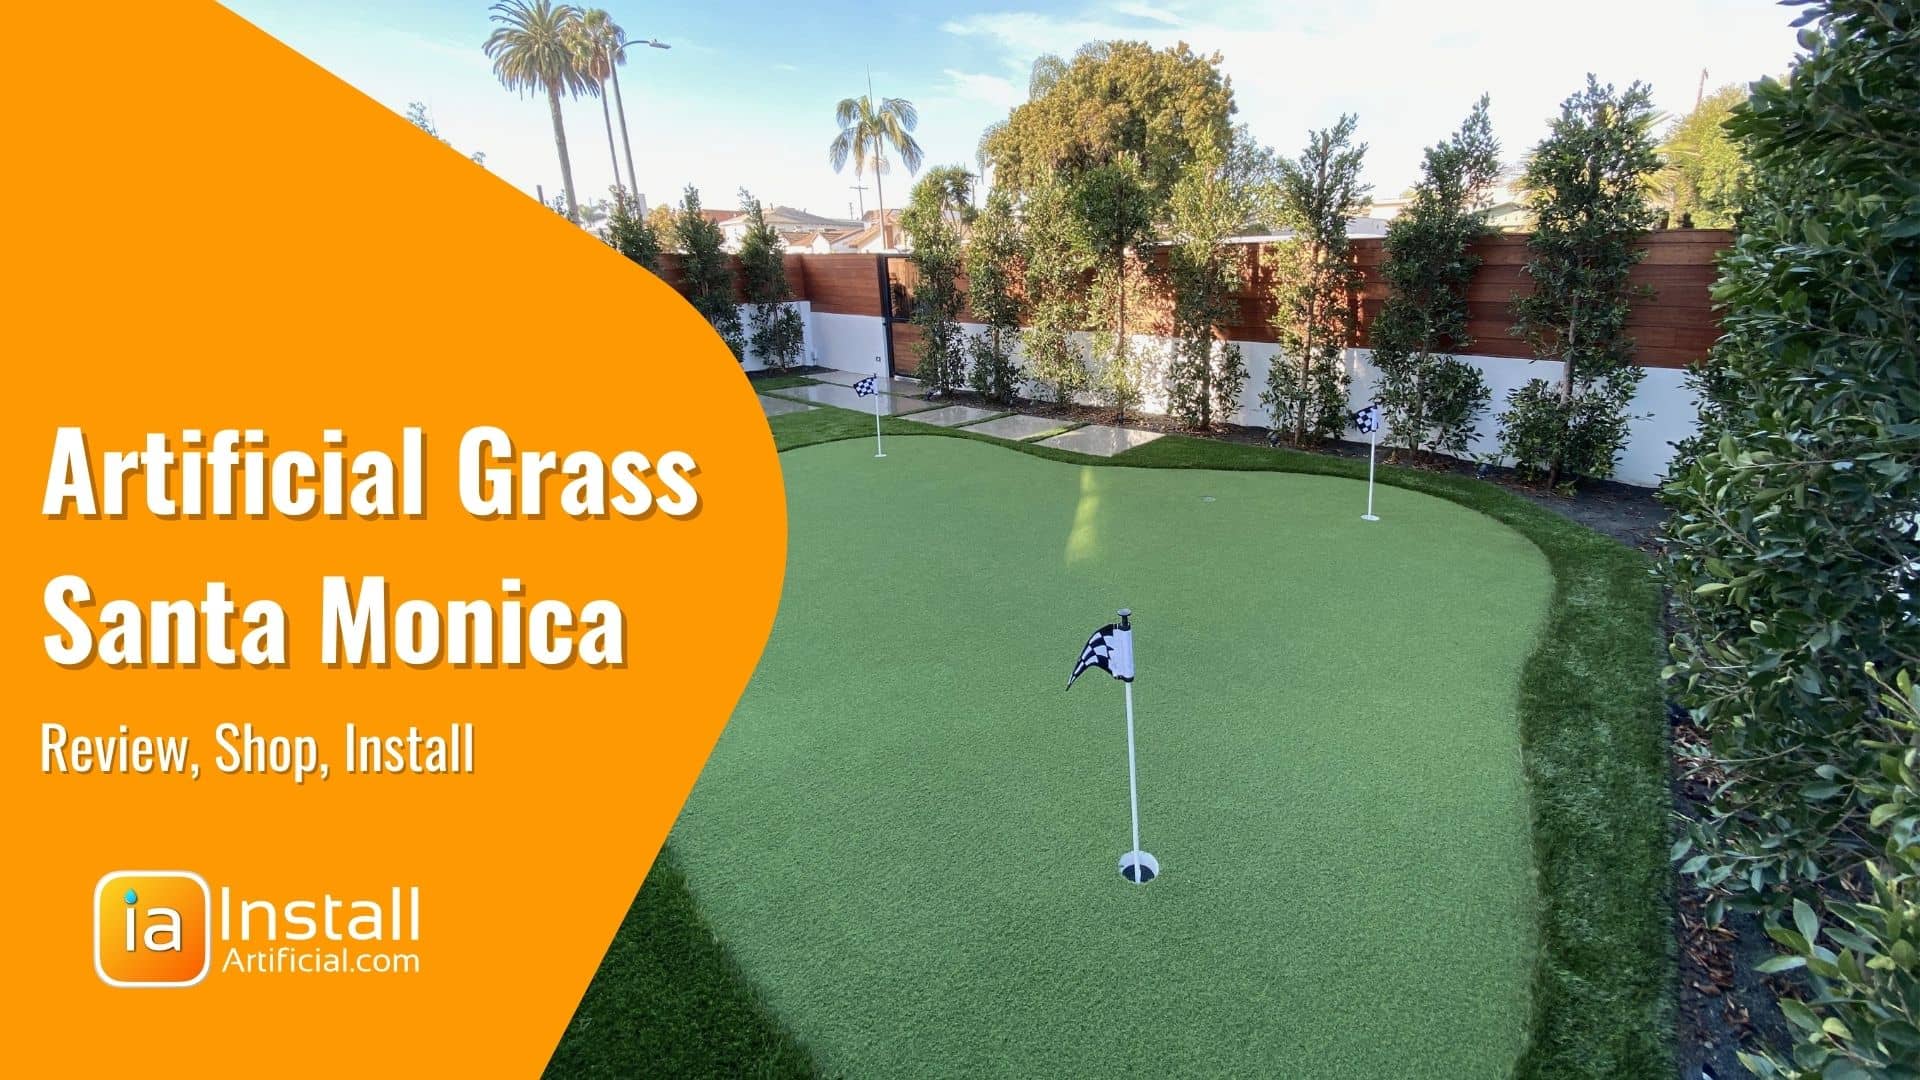 How Much Does it Cost to Install Artificial Grass in Santa Monica?